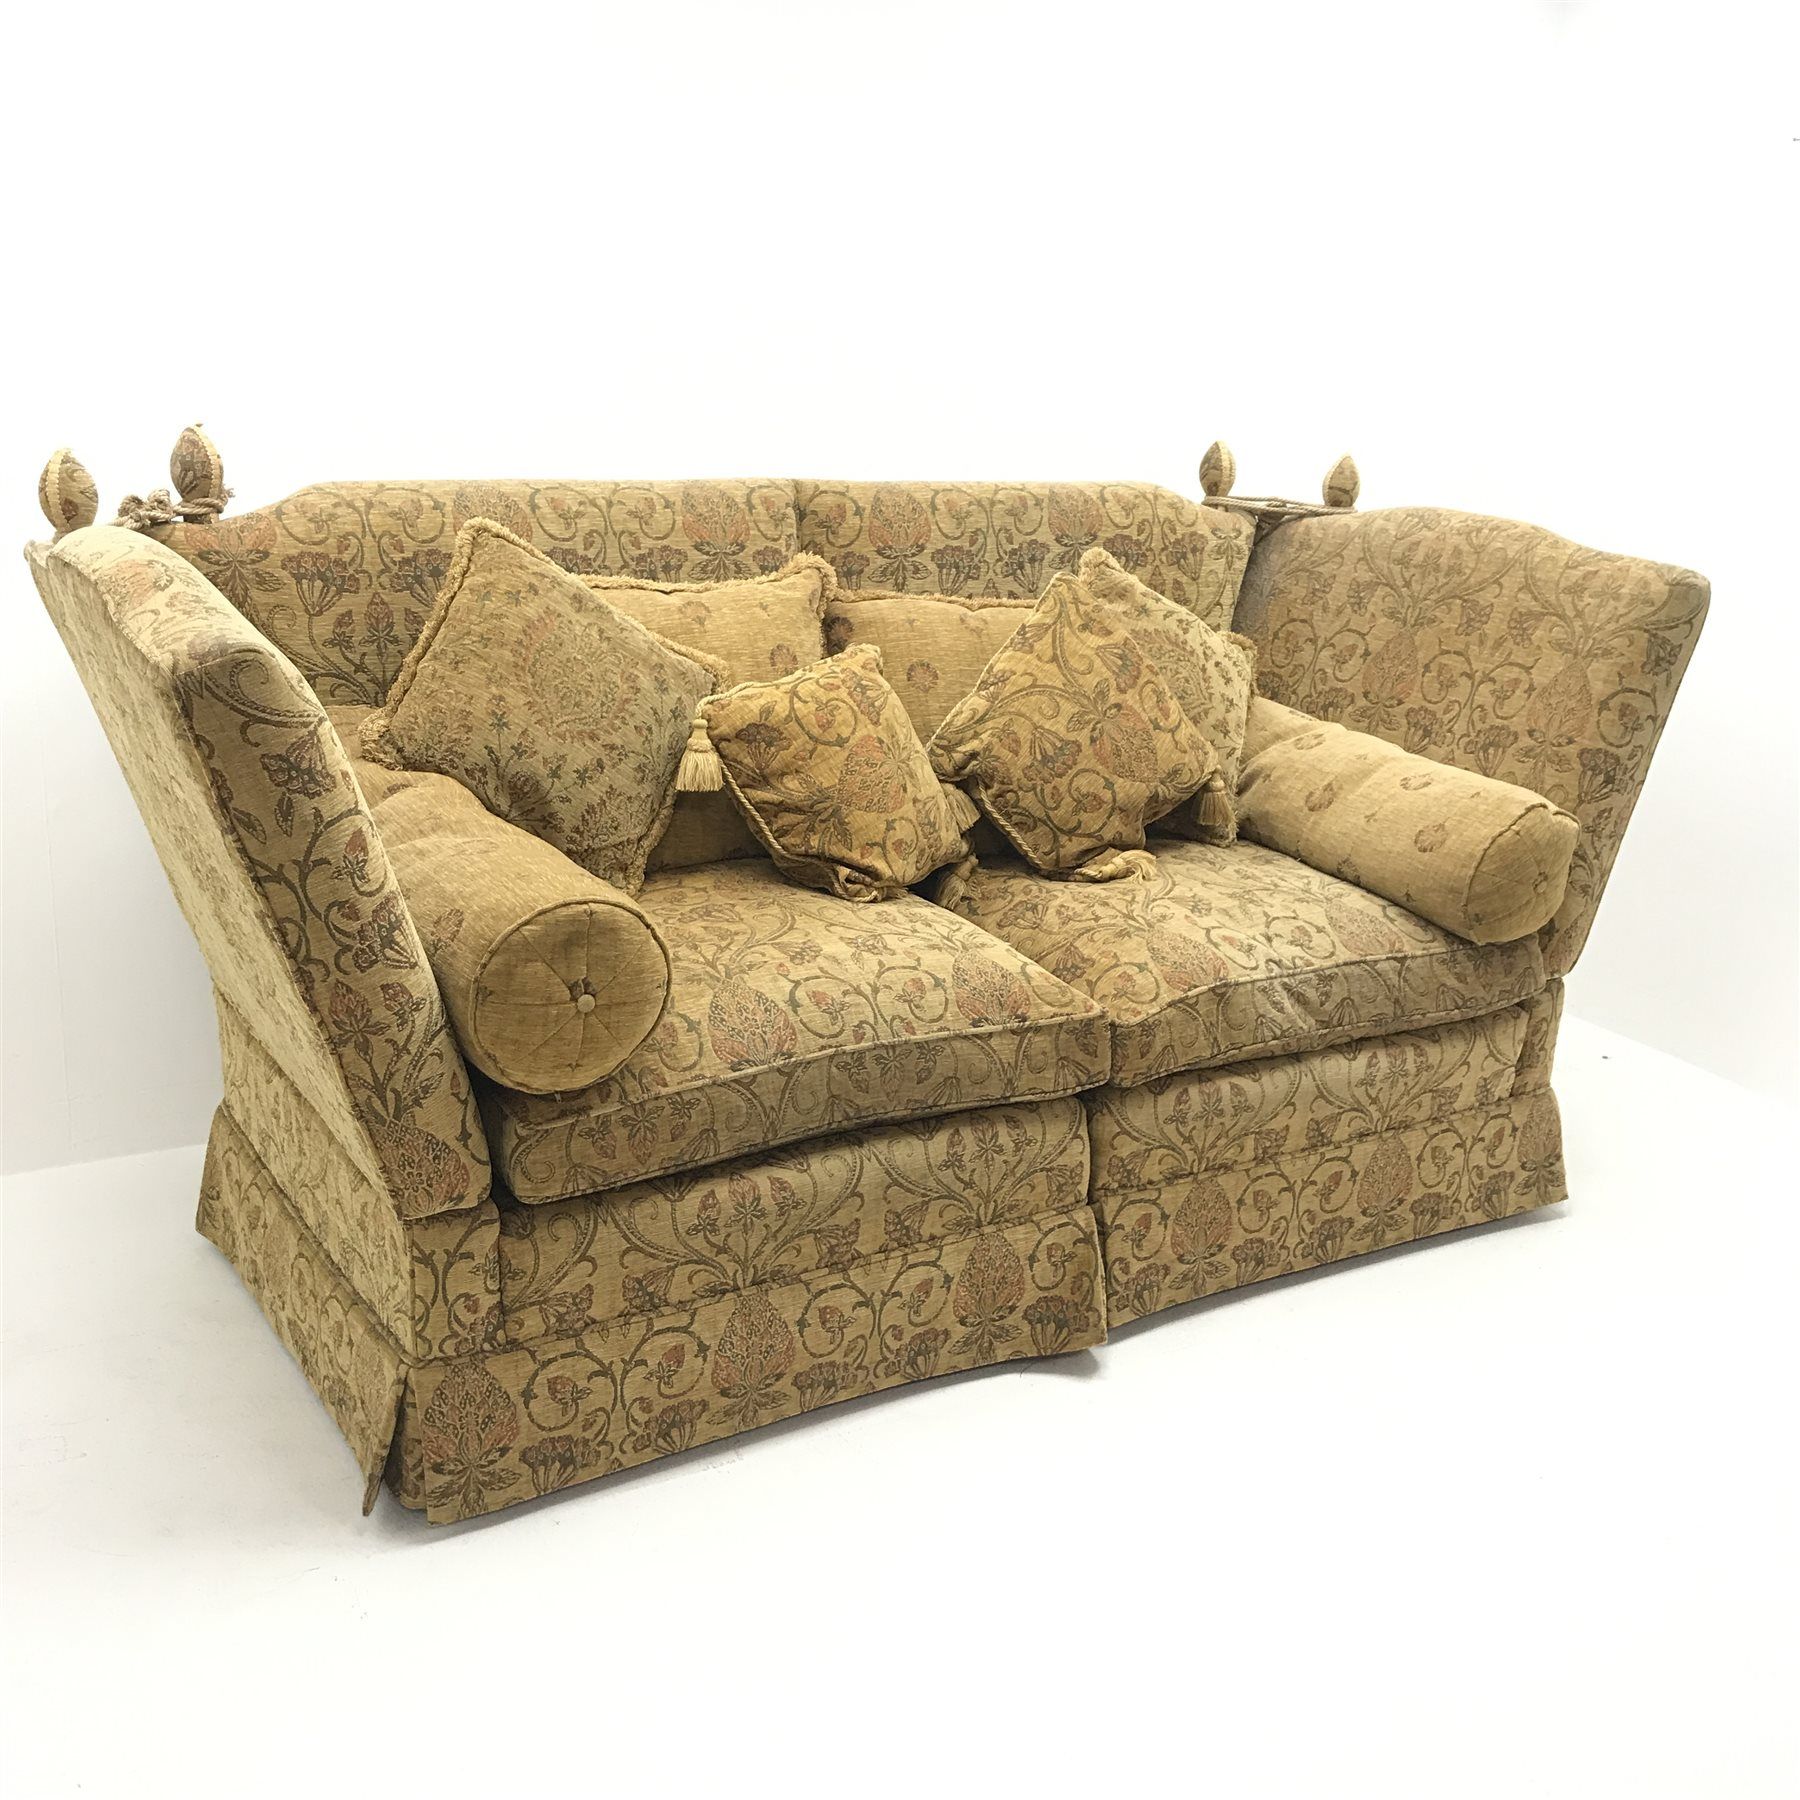 Knowle Style Two Seat Sofa, Upholstered In Traditional Floral Patterned Regarding Sofas In Pattern (Gallery 7 of 20)